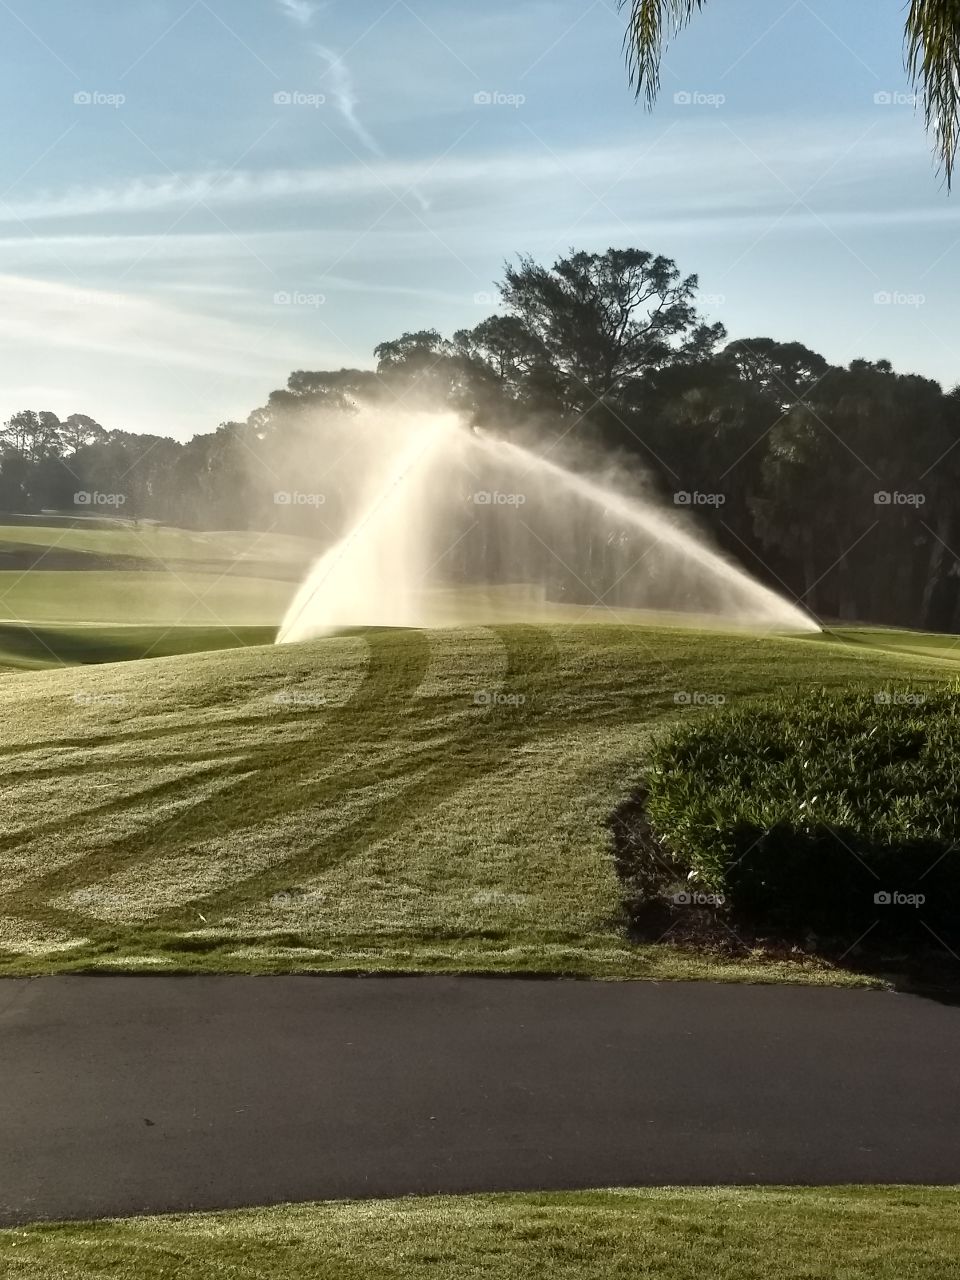 watering the greens